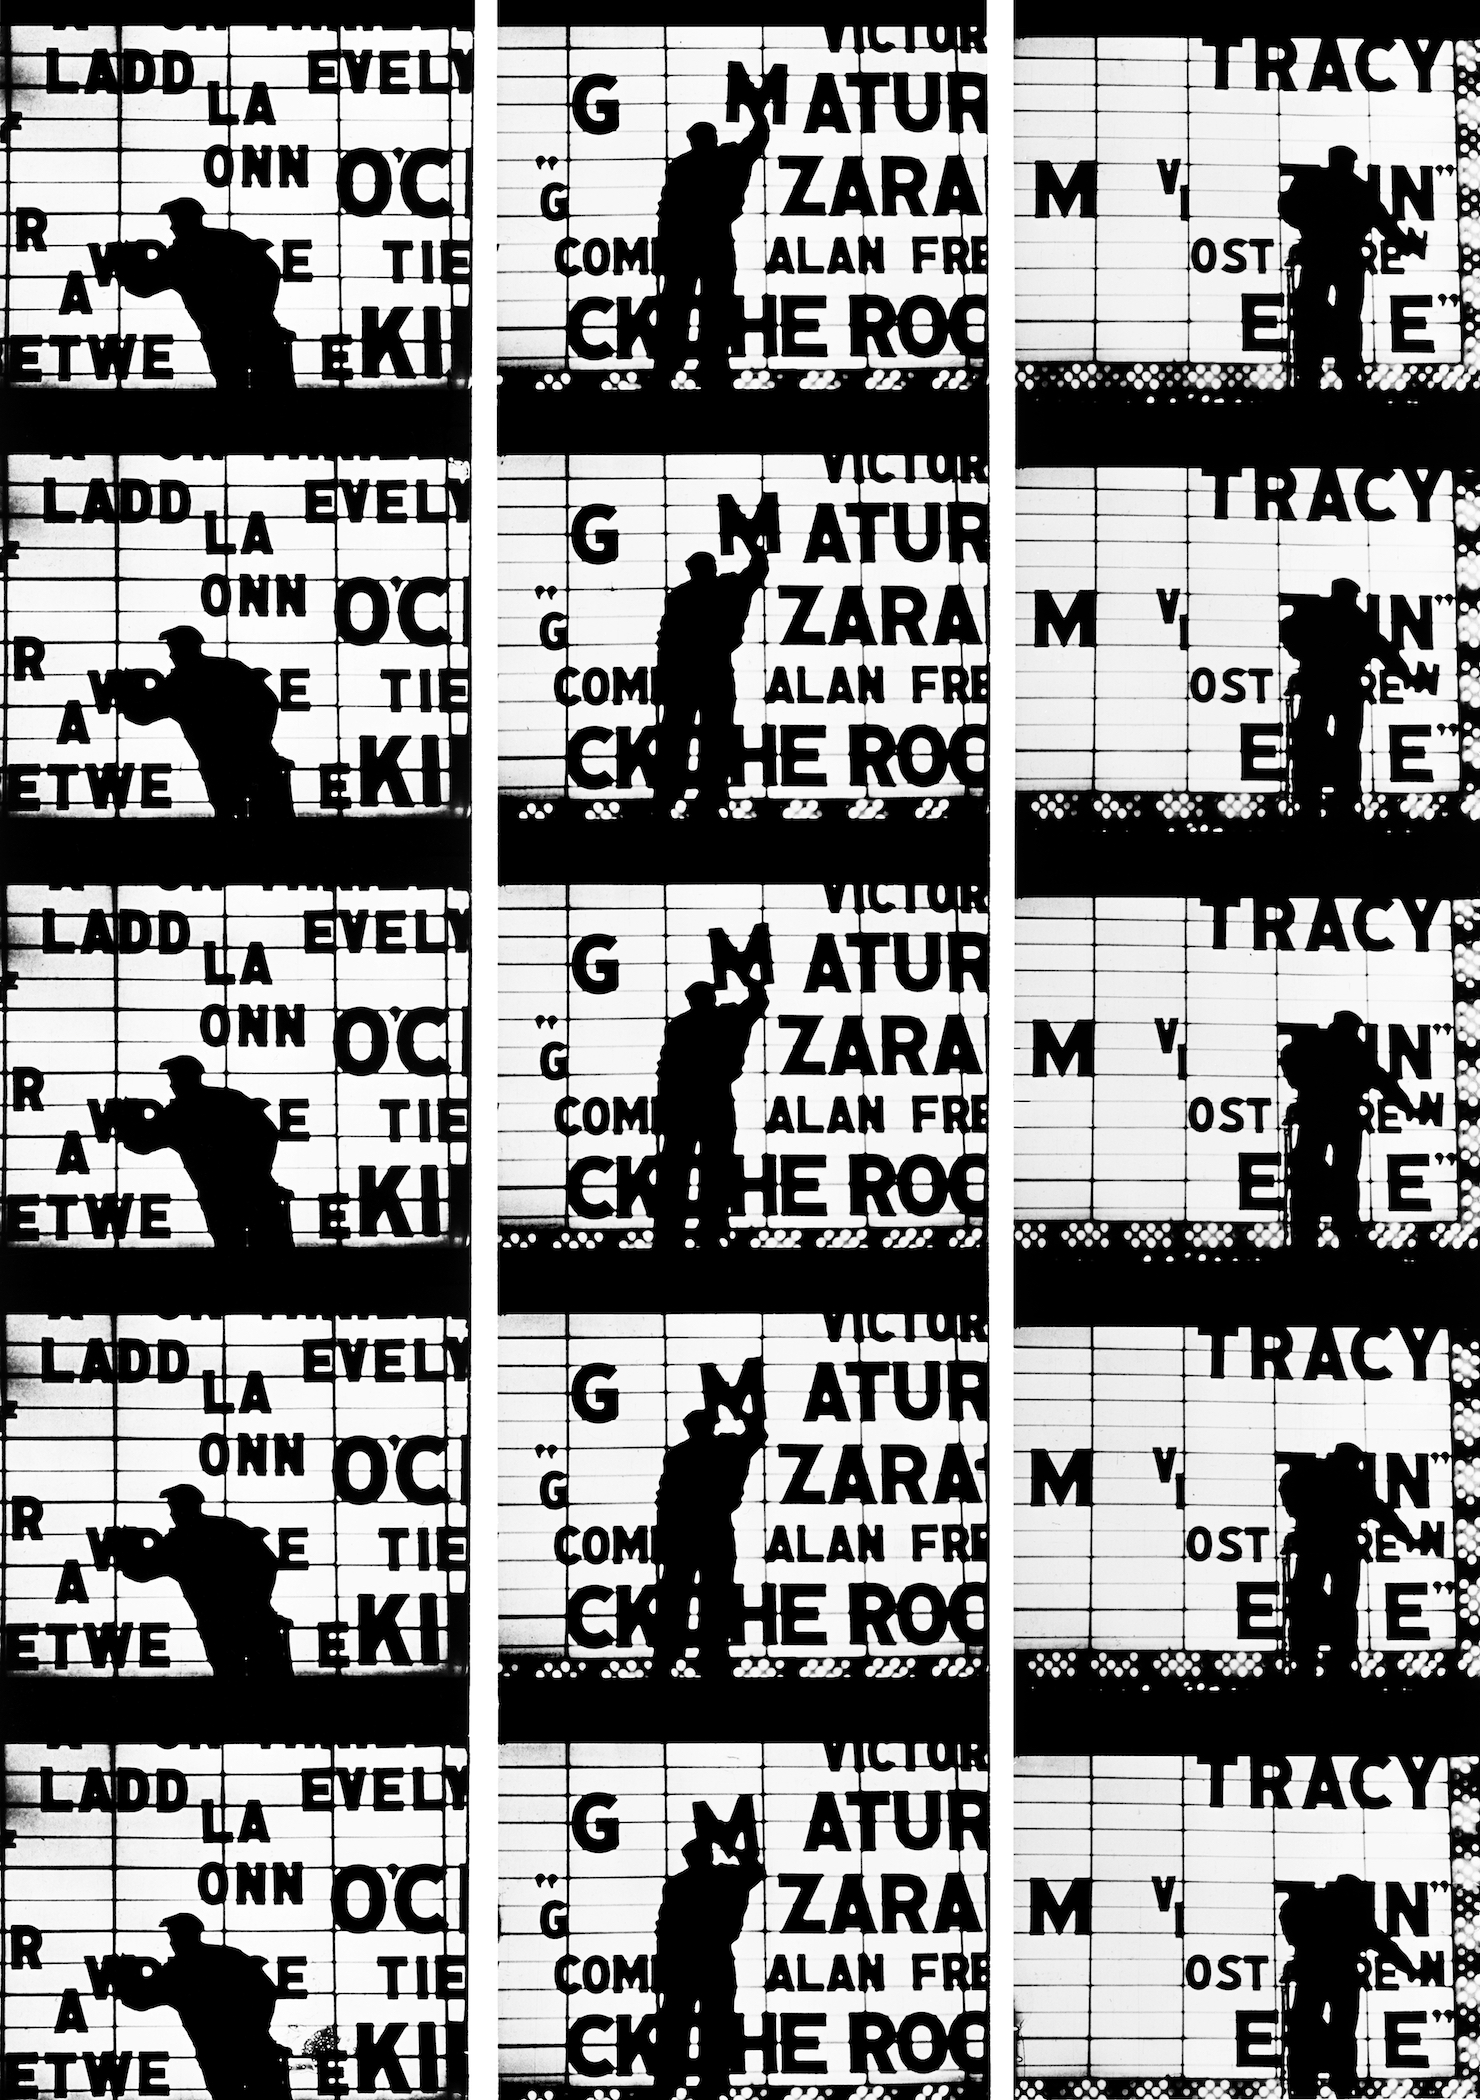 Black-and-white photo of film strips of someone adjusting the lettering on the broadway lights